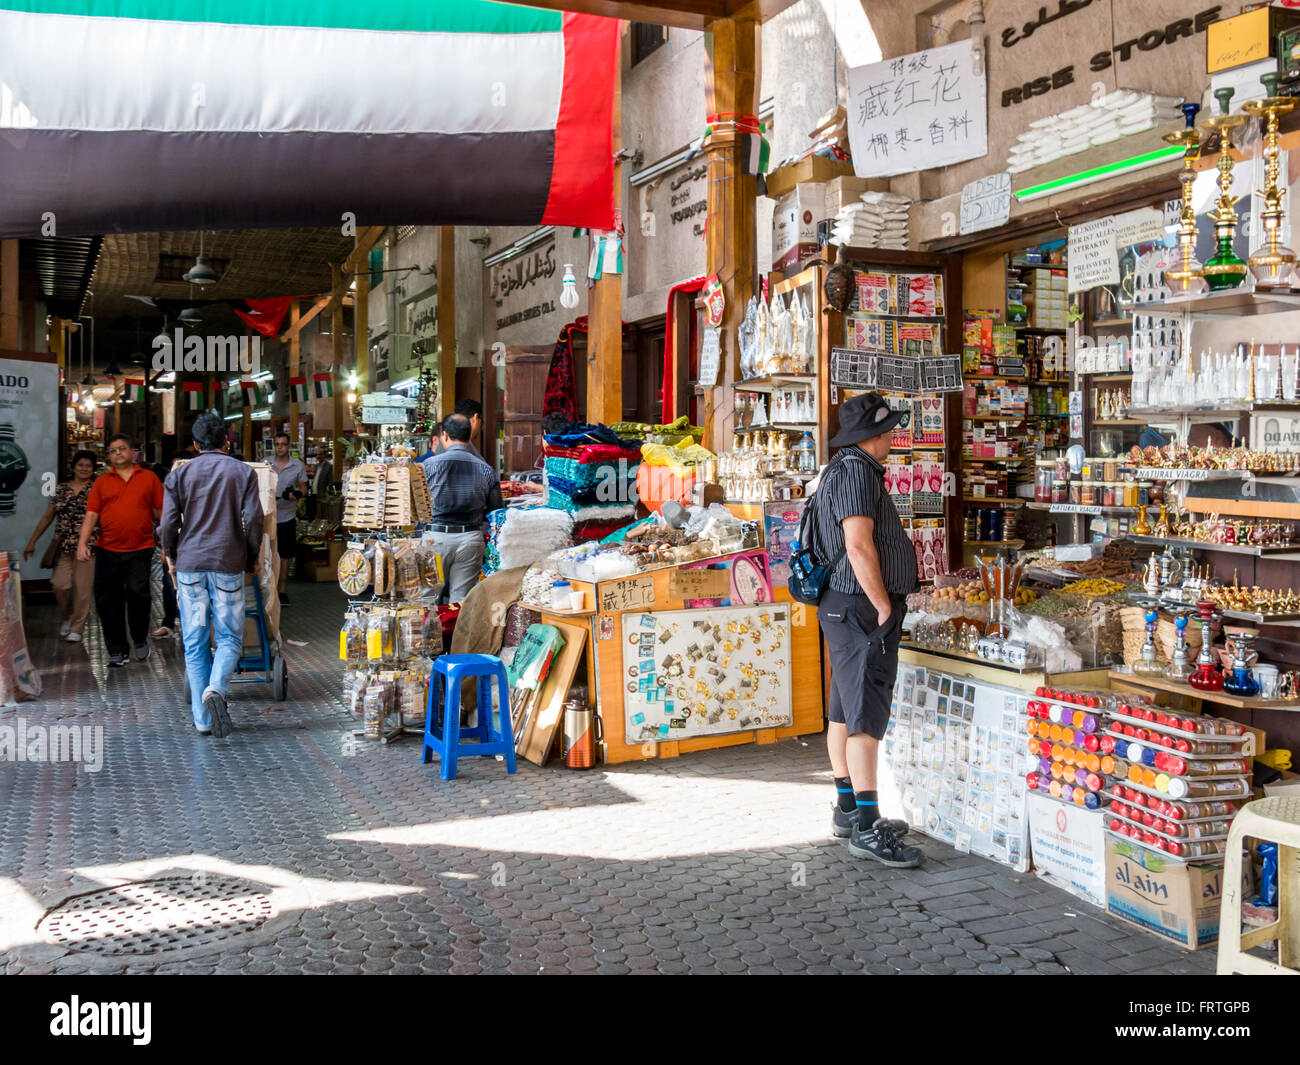 People shopping in the spice souk in the Deira district of Dubai, United Arab Emirates Stock Photo